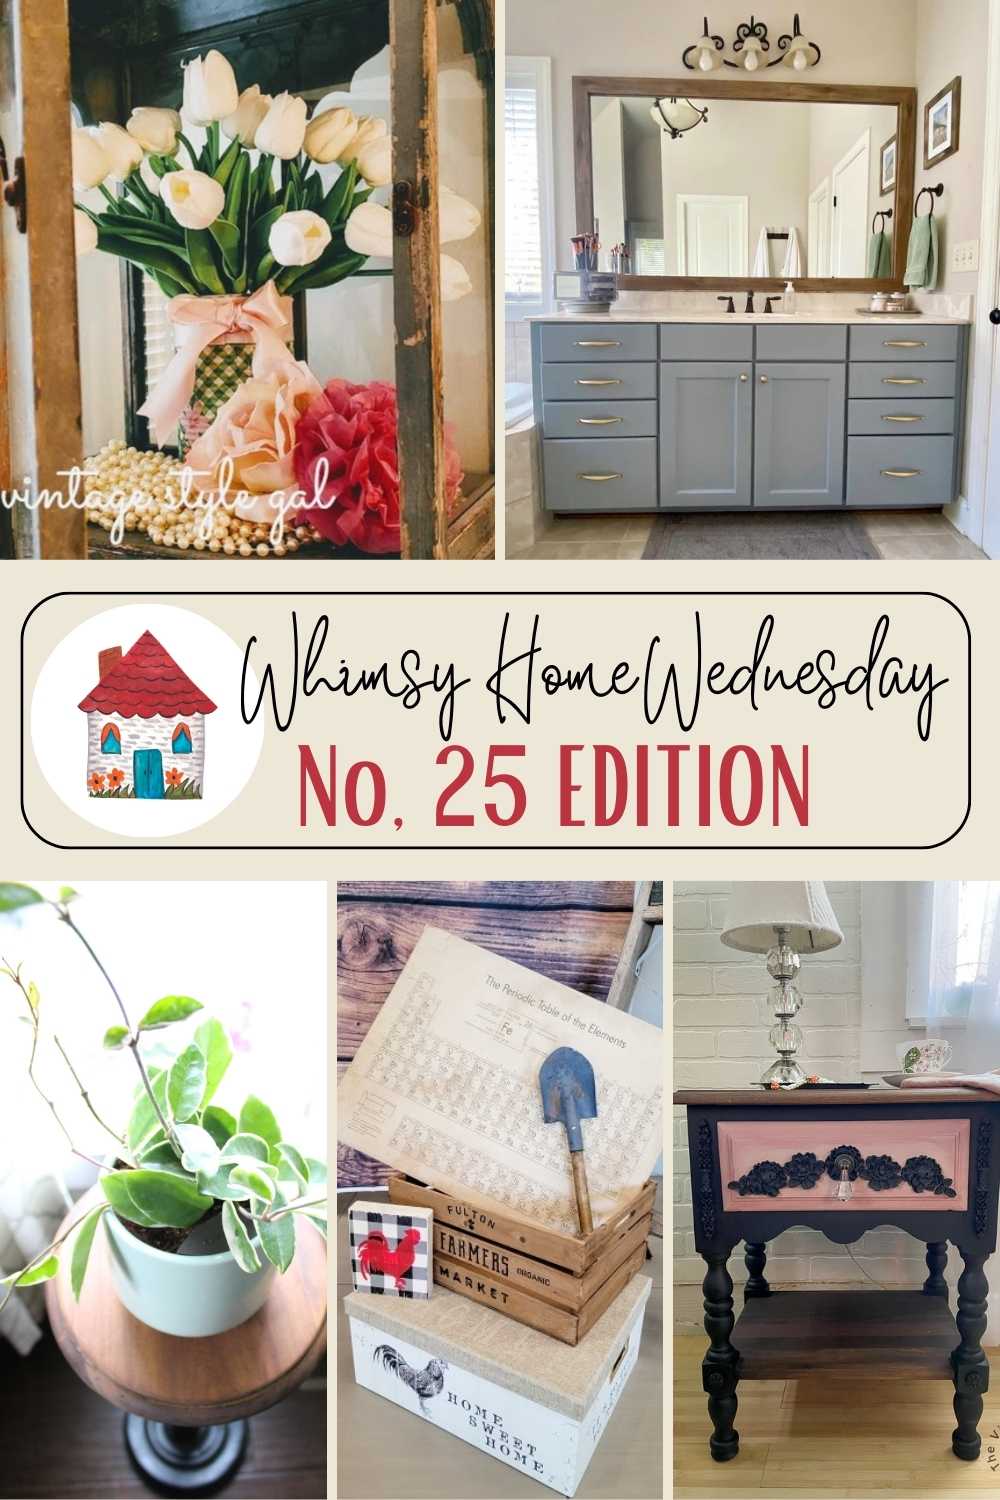 Whimsy Home Wednesday Blog Link Party No. 25